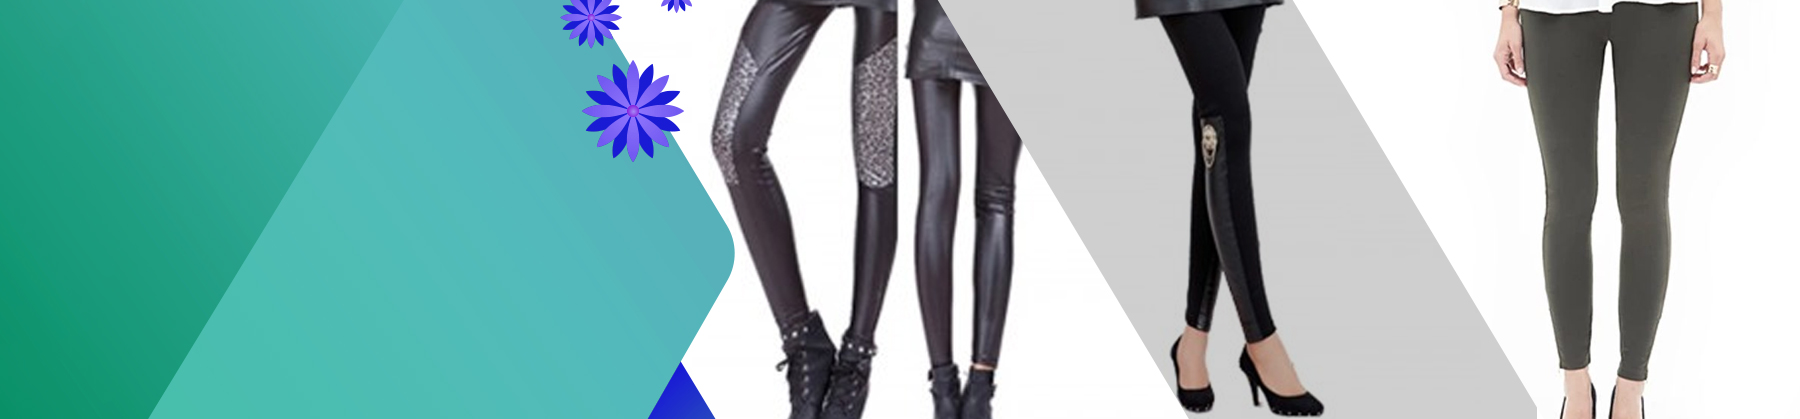 Wholesale Womens Leggings Manufactures at Alanic Clothing in USA ...